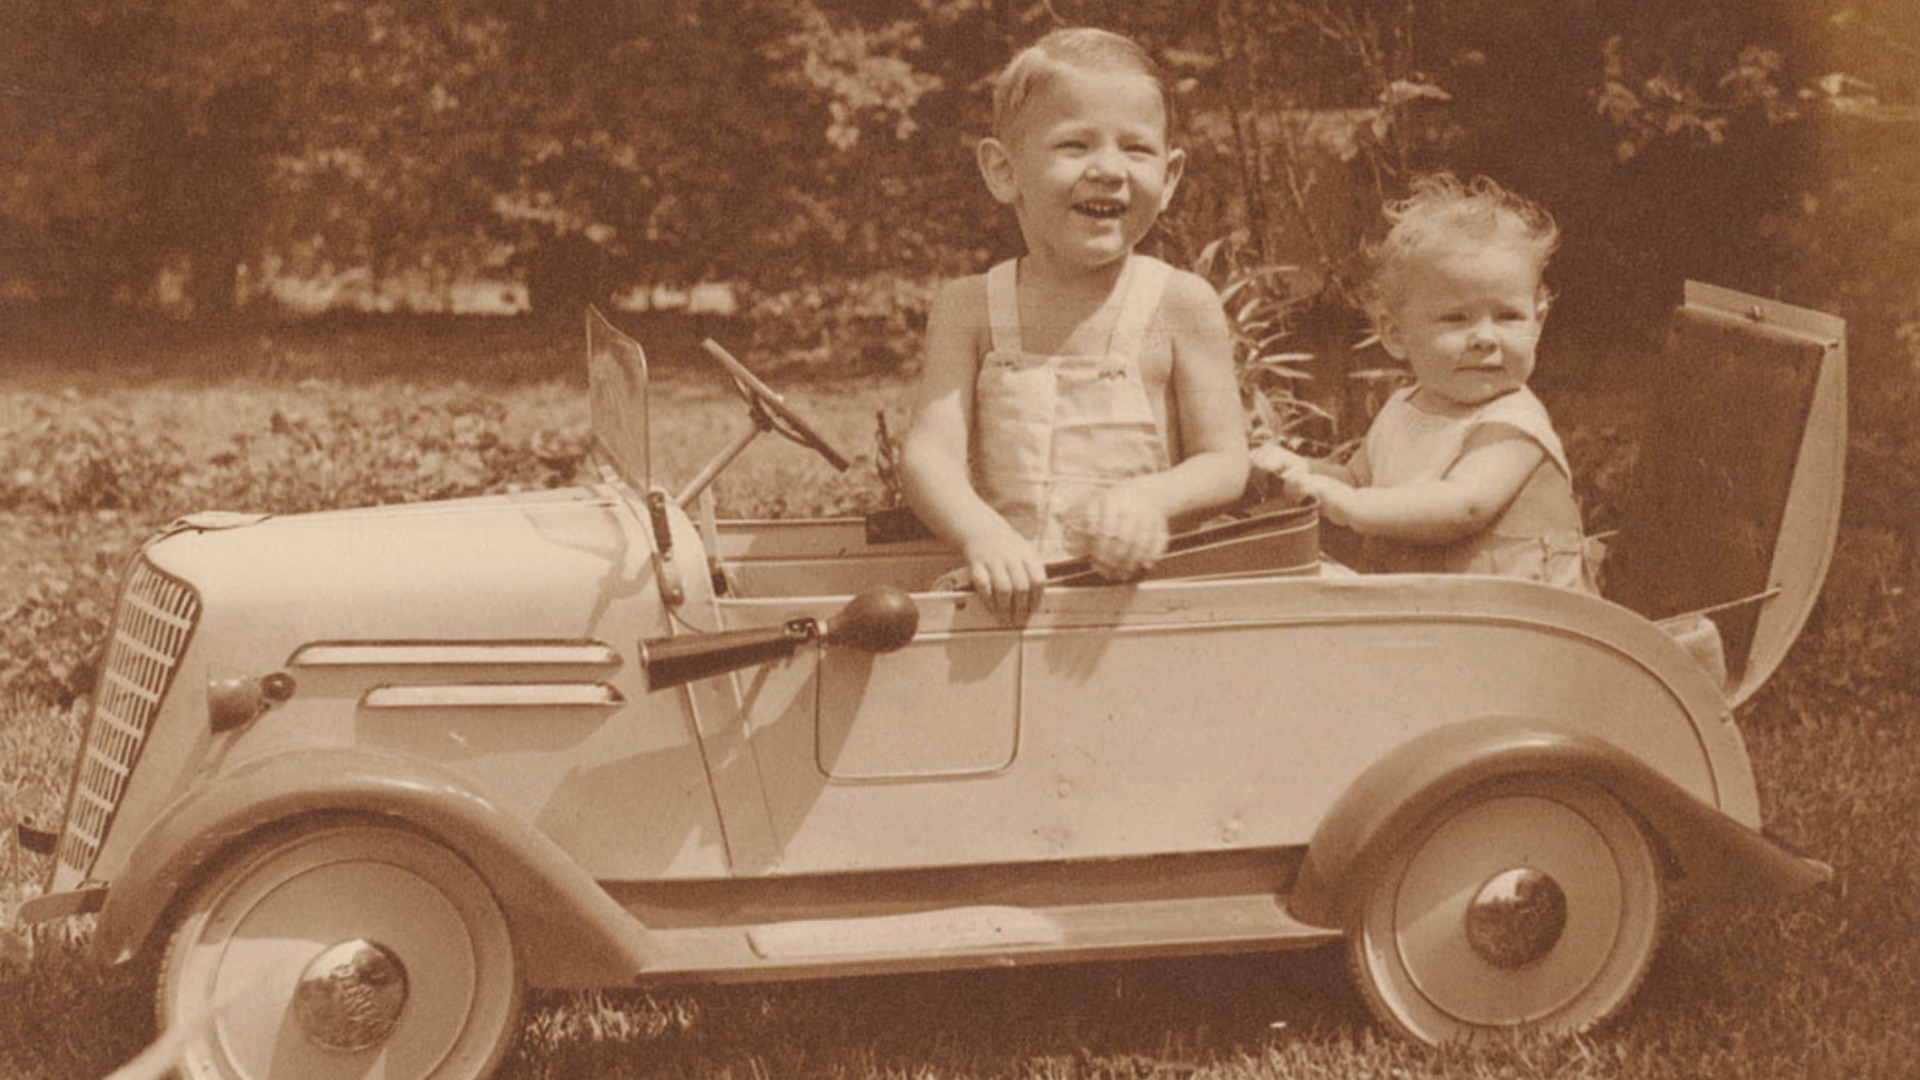 Two children sitting in a toy car